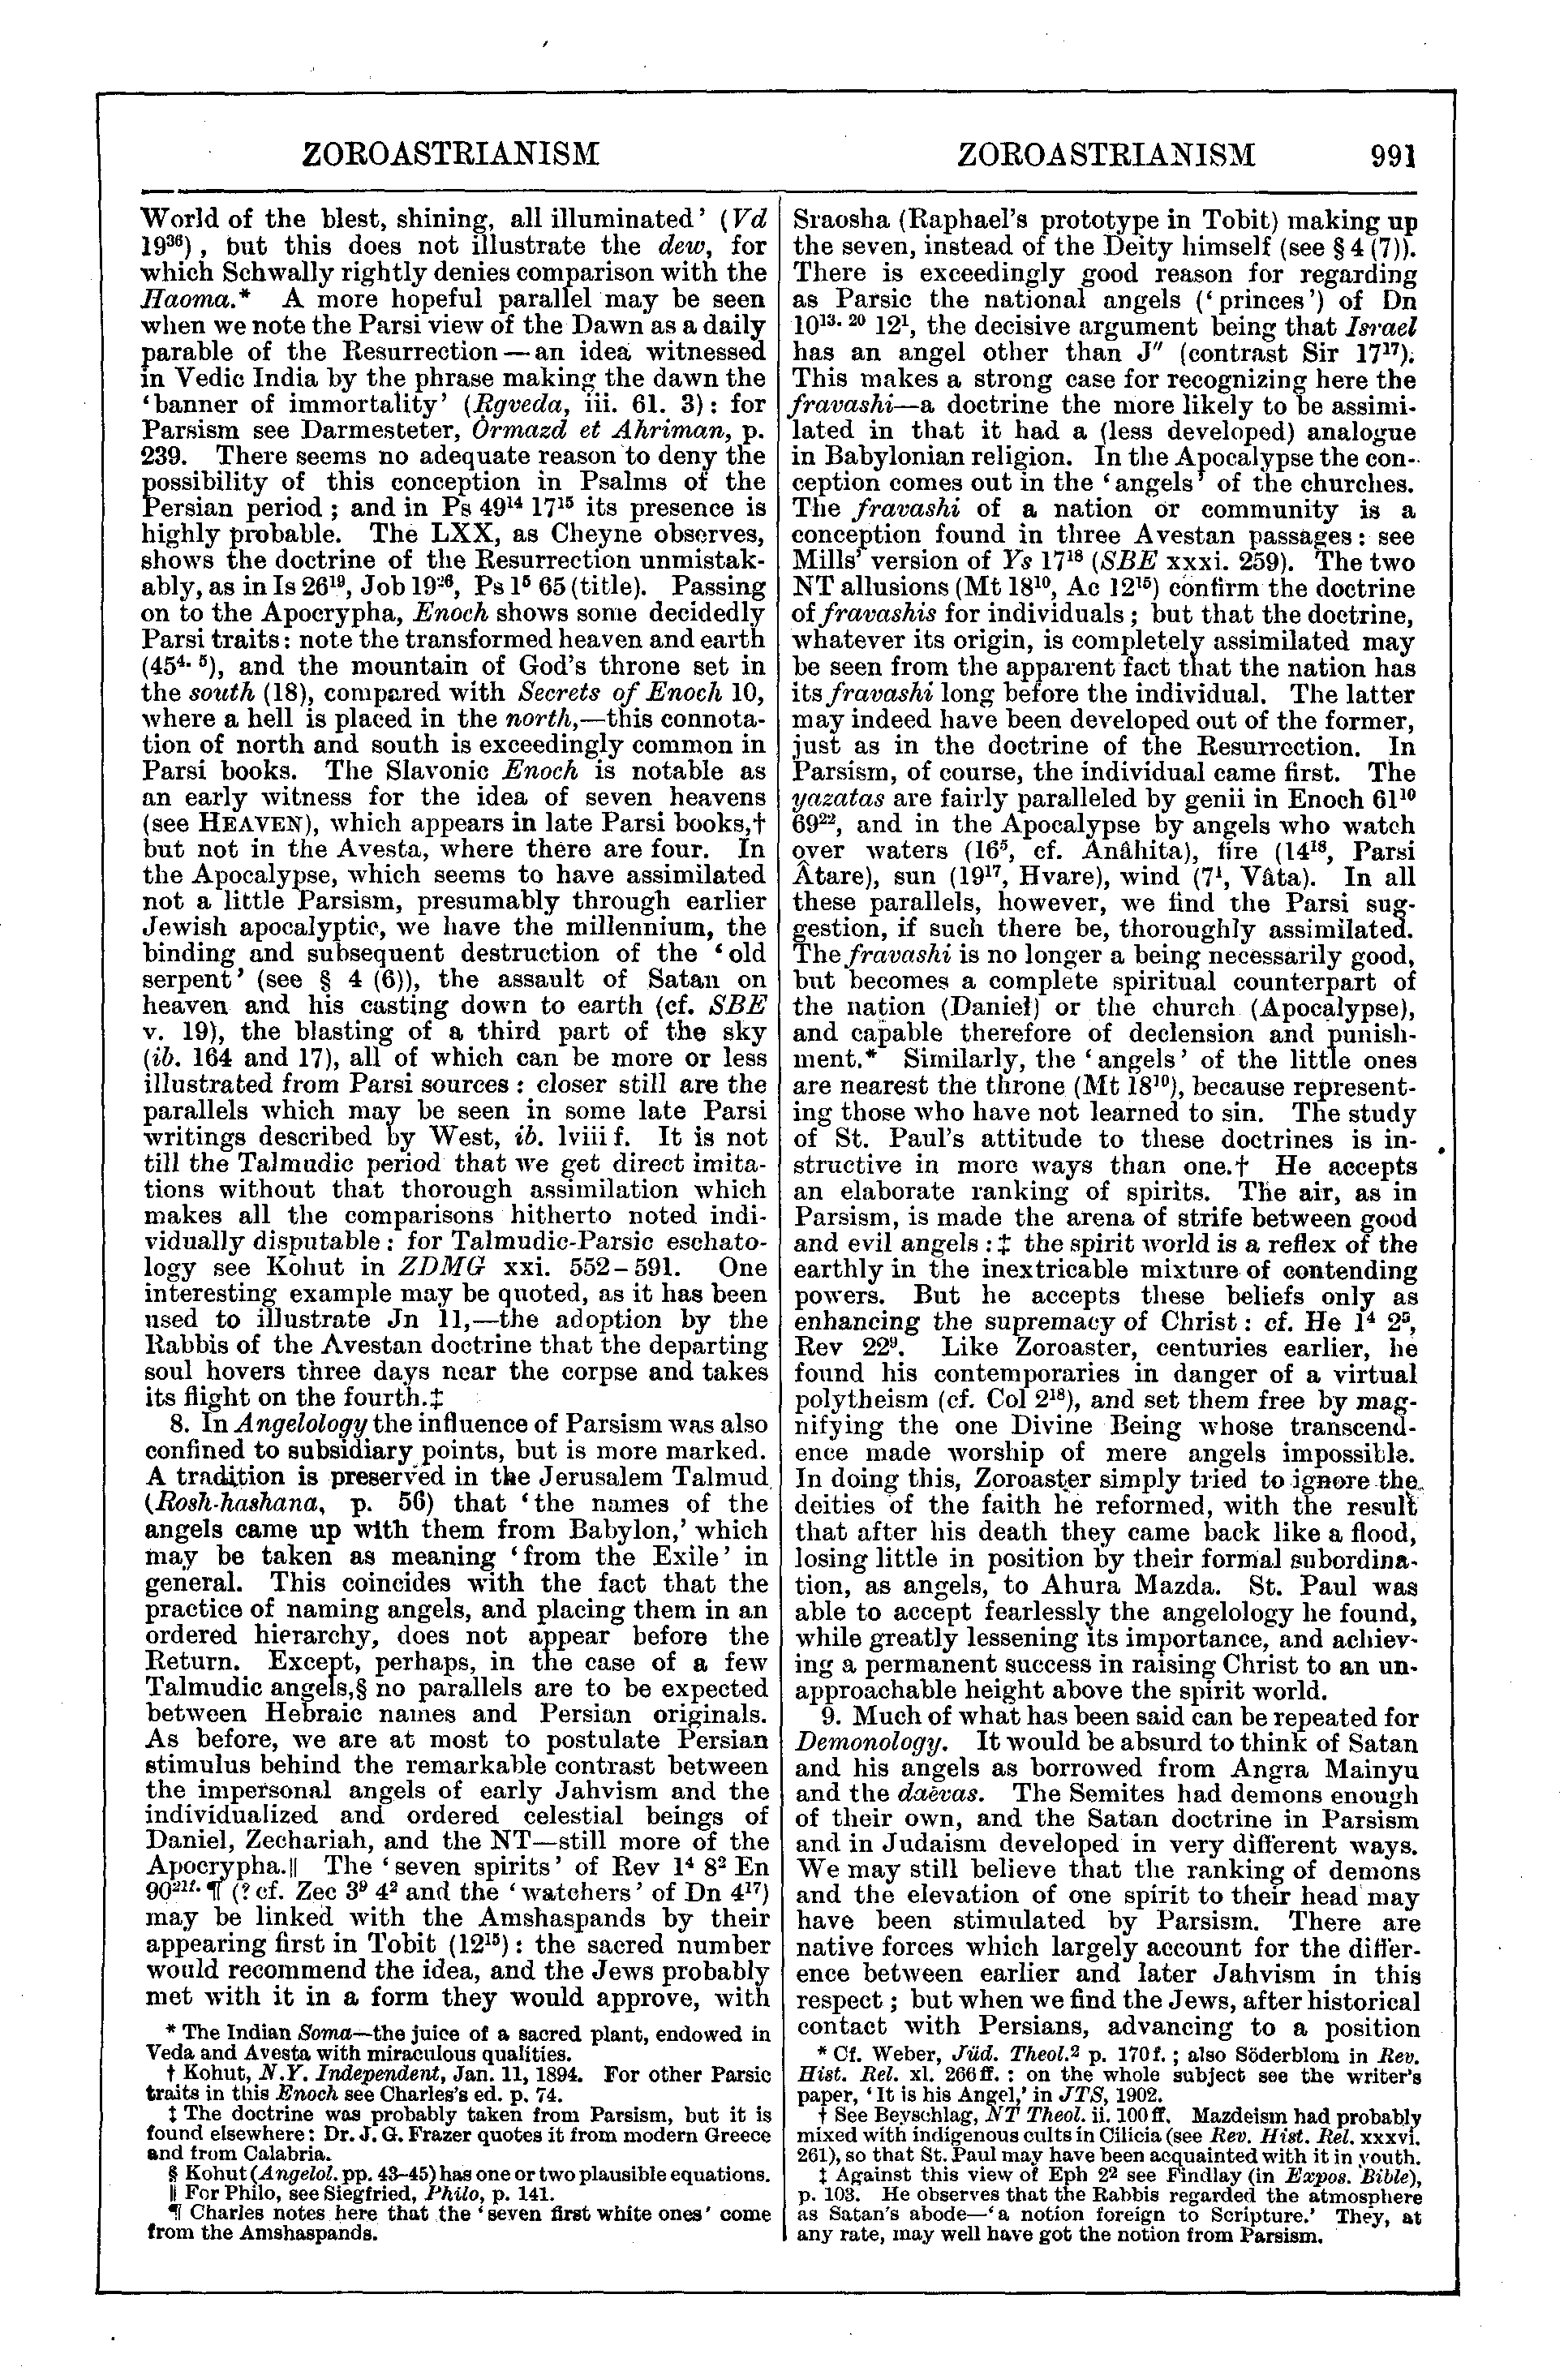 Image of page 991